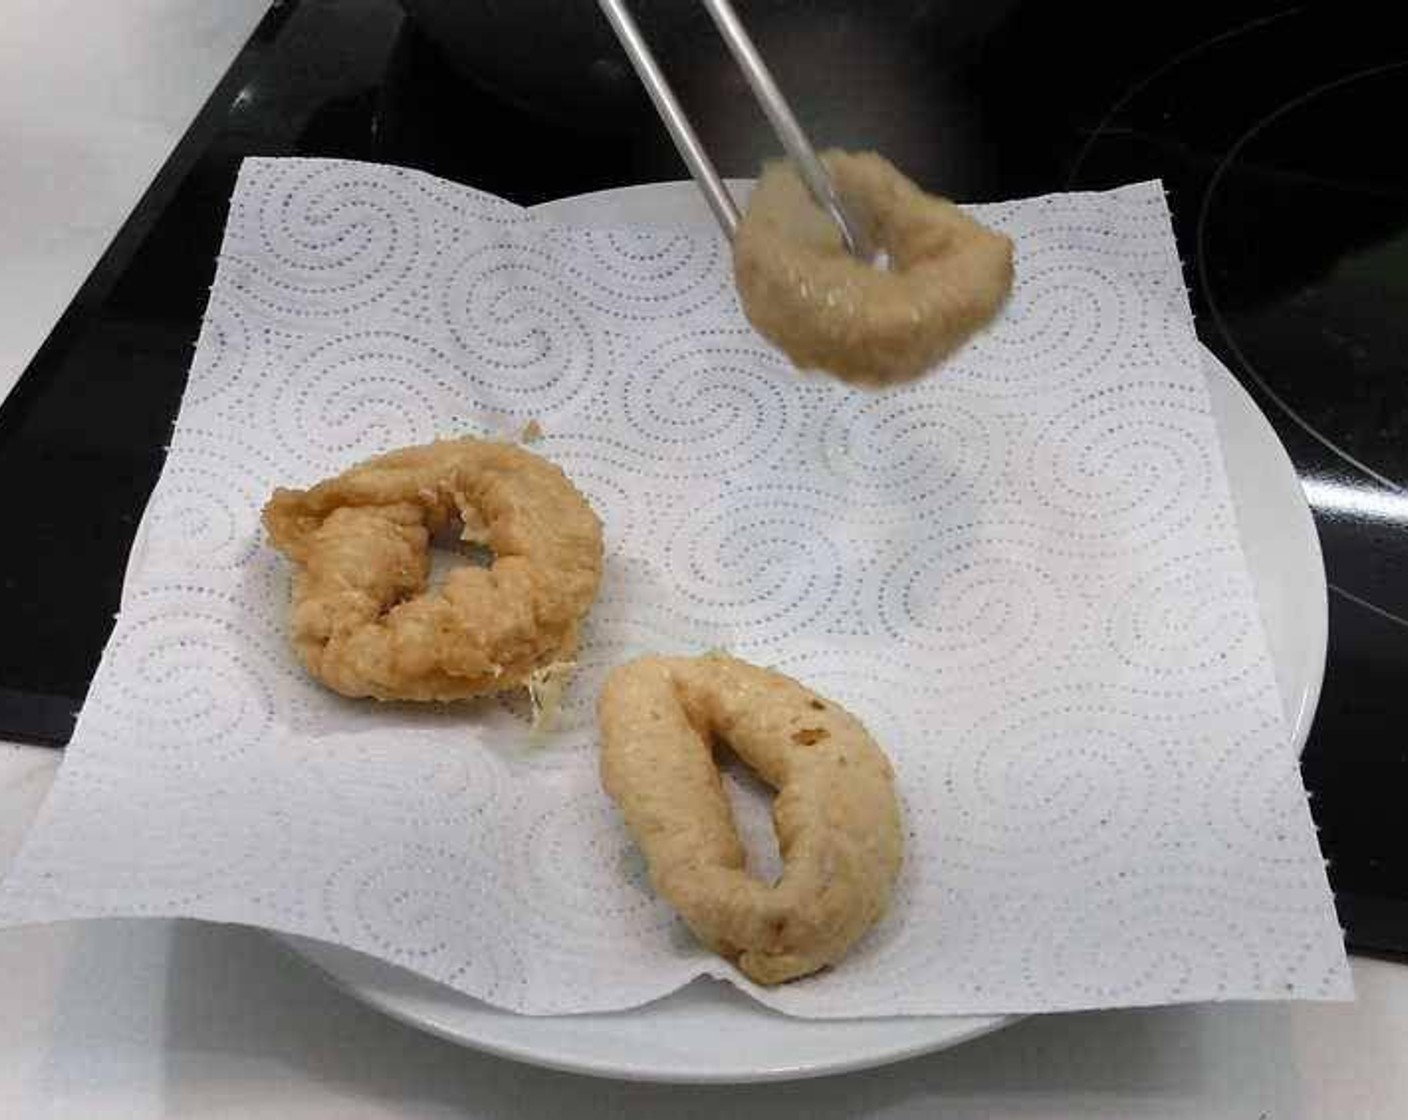 step 6 Keep frying till golden brown in color. Remove and transfer to a plate with paper towel to drain excess oil.